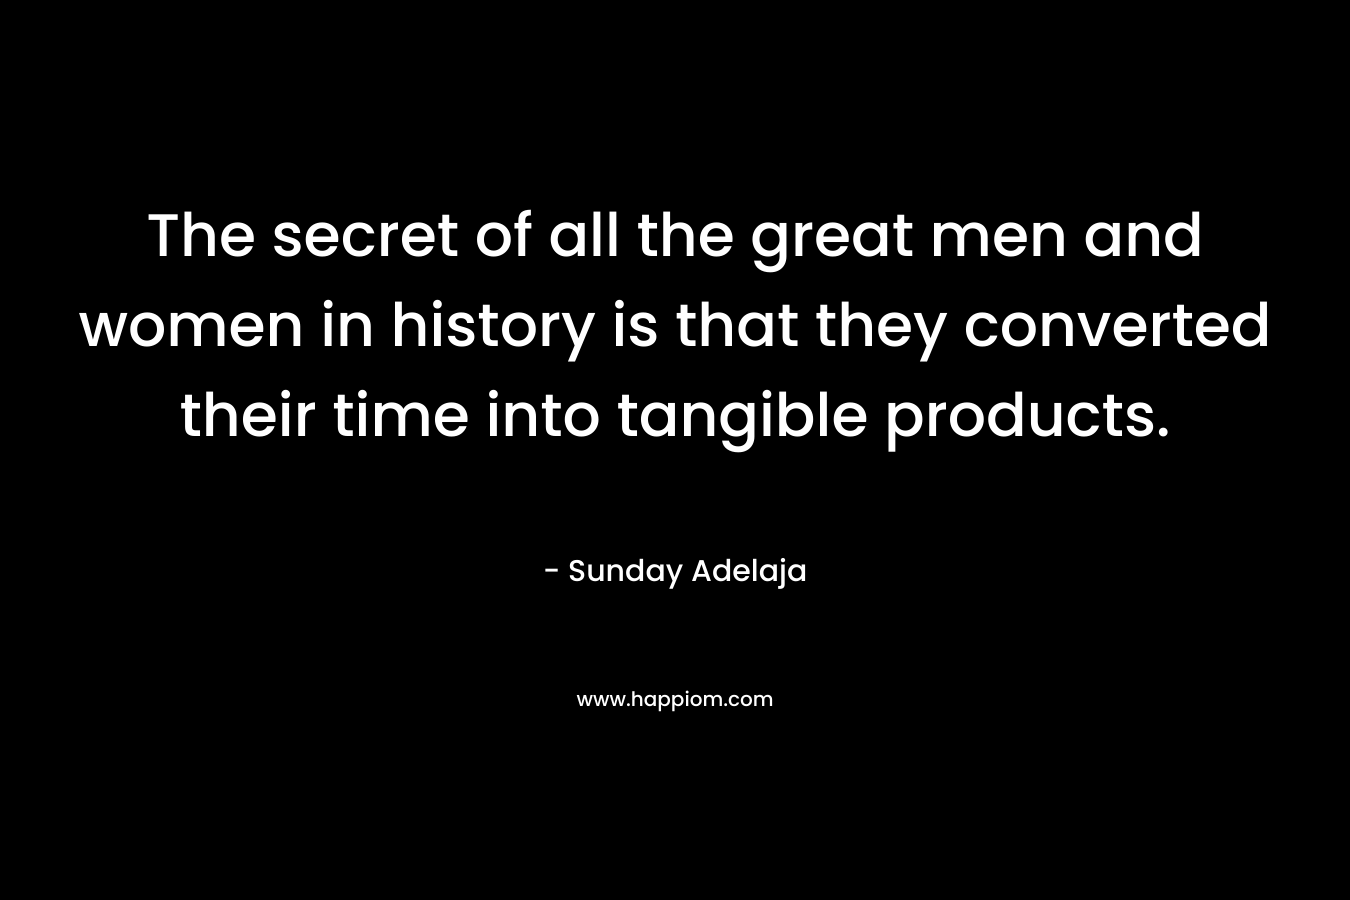 The secret of all the great men and women in history is that they converted their time into tangible products.